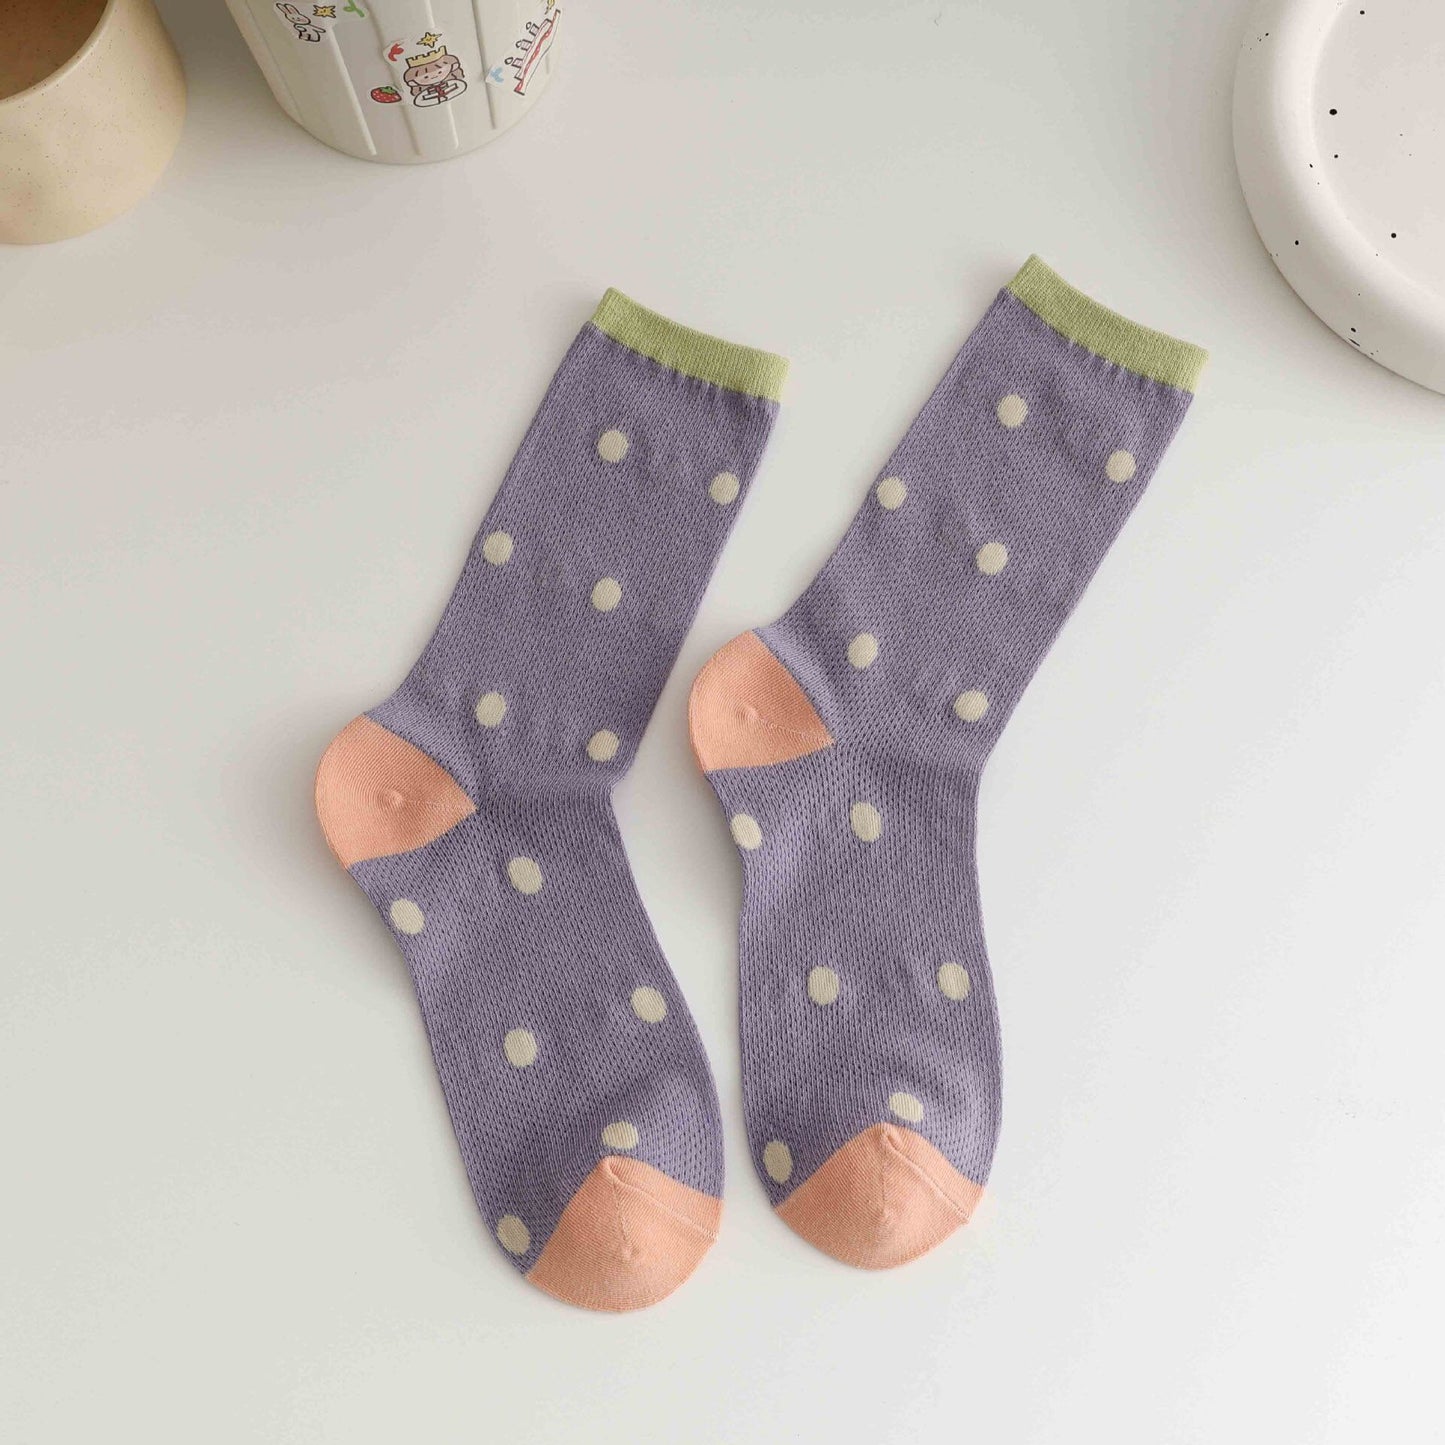 Miss June’s| Women’s light weight cotton blended socks | Cute | Colorful | Summer | Patterned | Gift Idea | Casual | Comfortable |